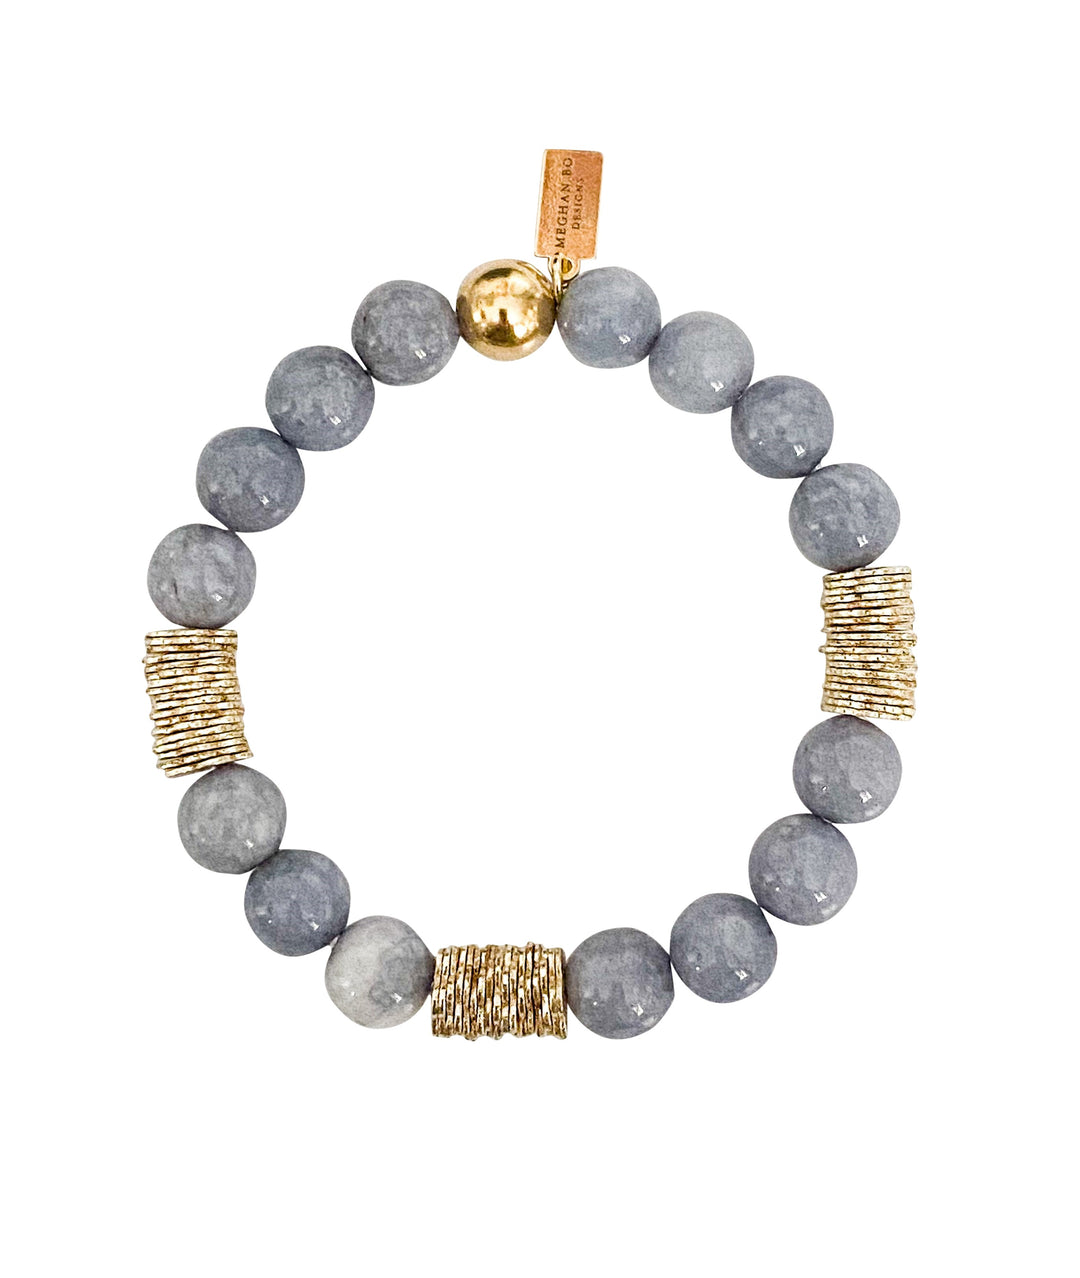 Gray jade beads with gold fill accent beads made by Meghan Bo Designs.